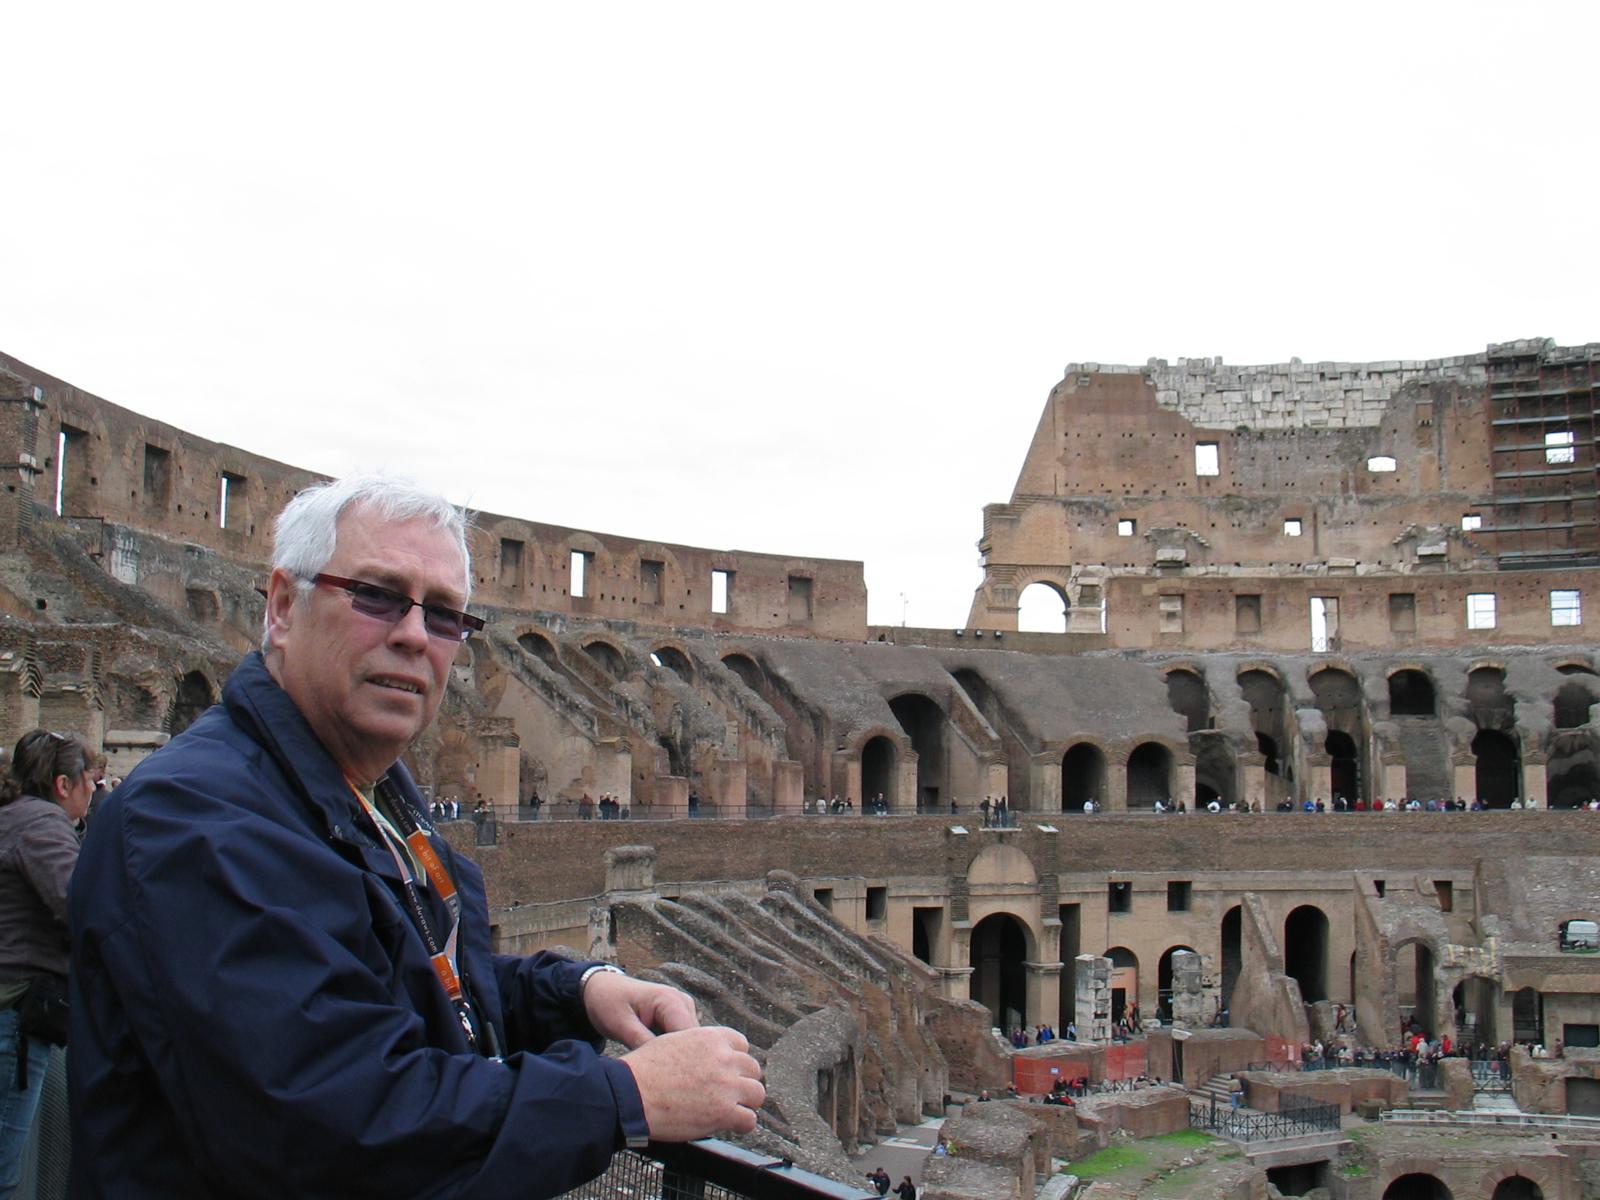 Dad at the Coliseum